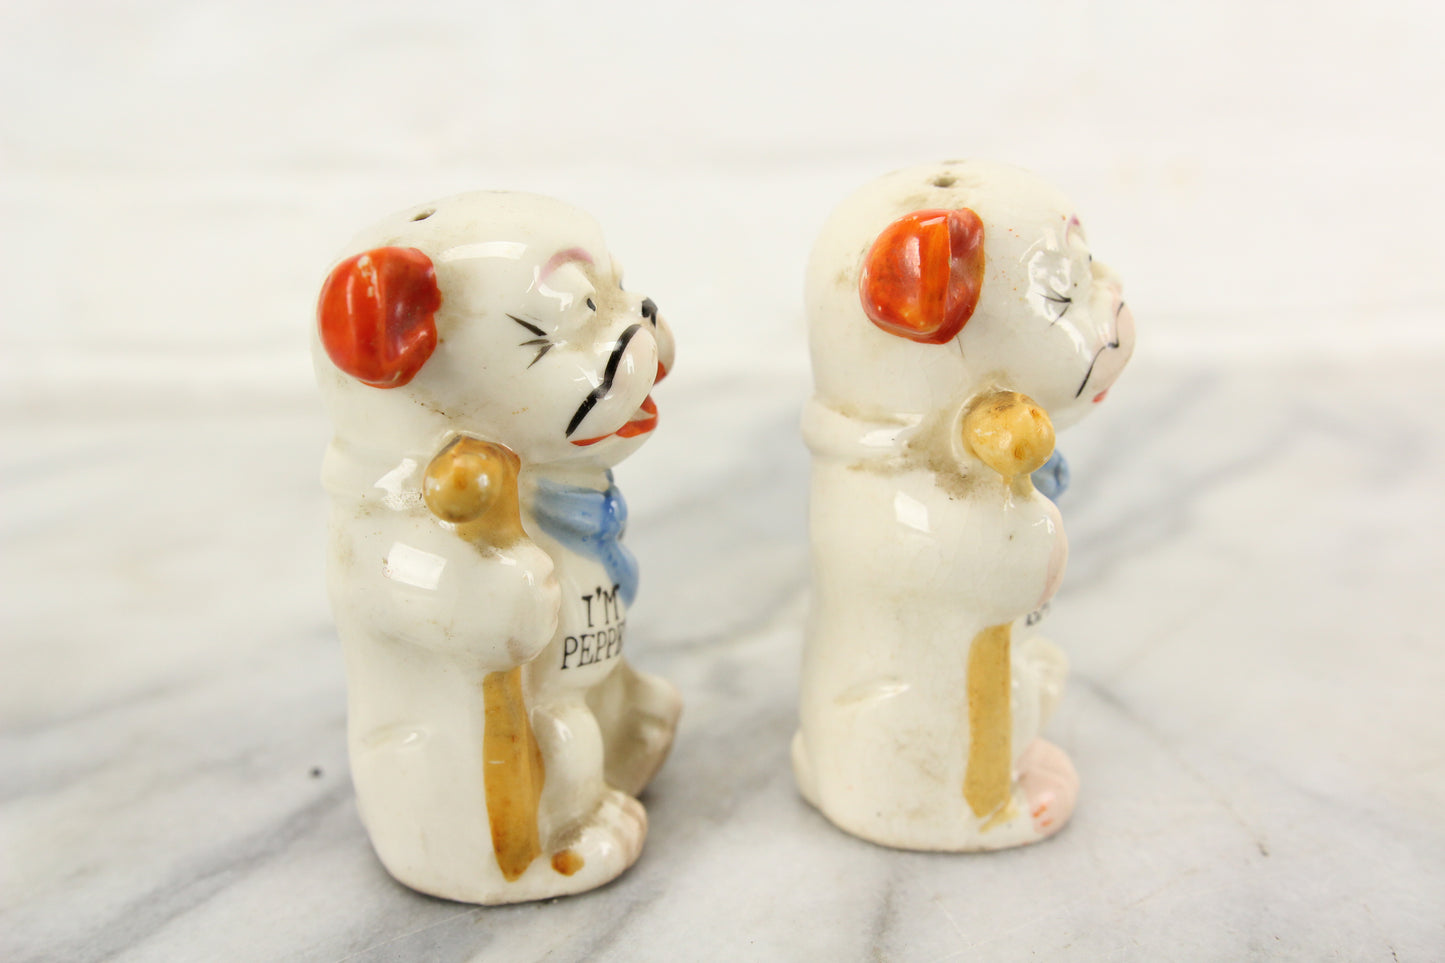 Dogs with Canes Porcelain Salt and Pepper Shakers, Made in Japan